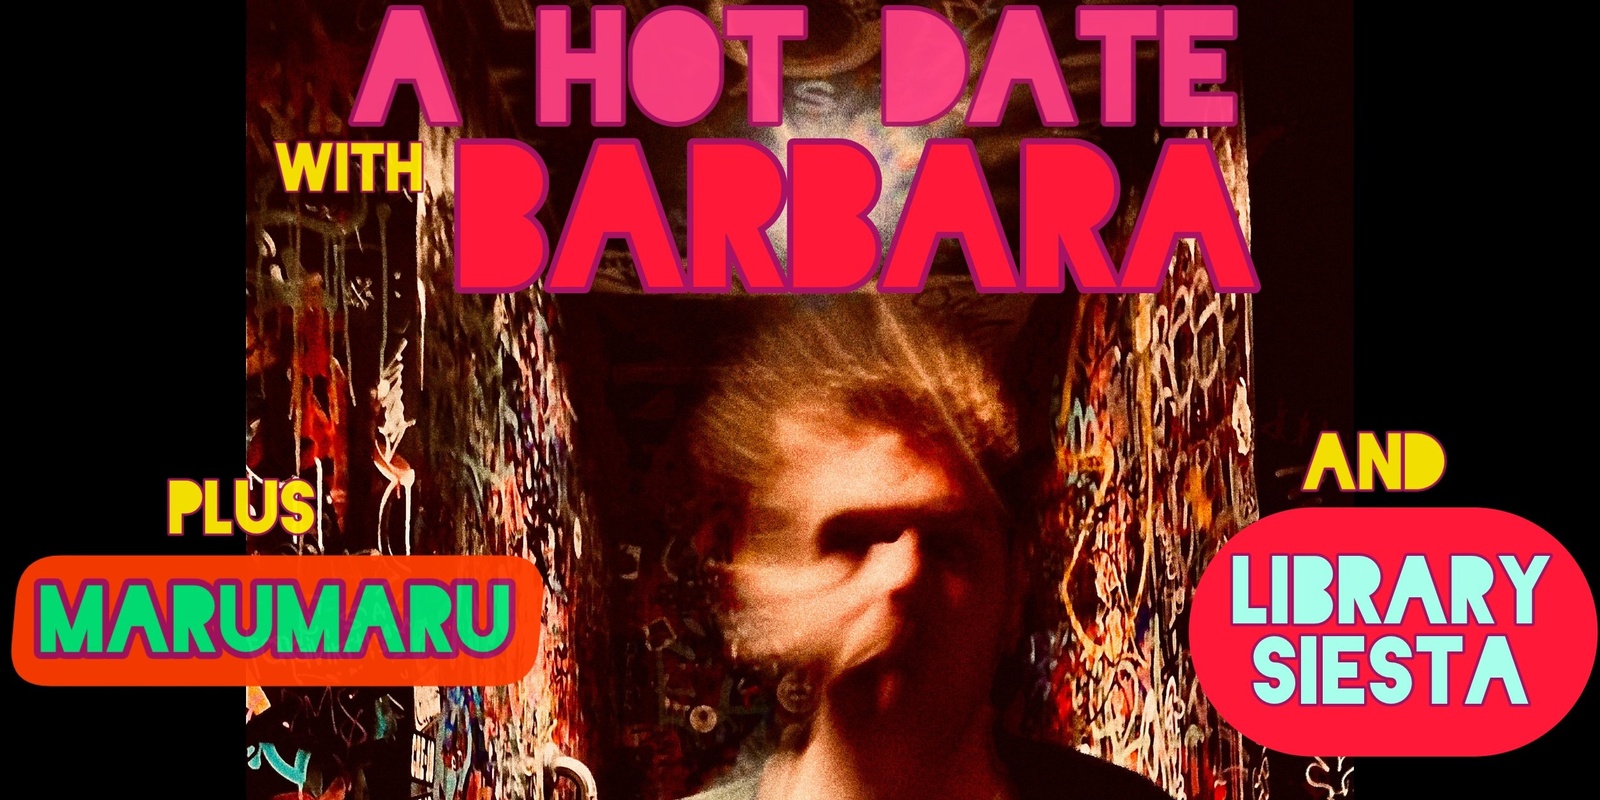 Banner image for A Hot Date with BARBARA w/ Marumaru & Library Siesta